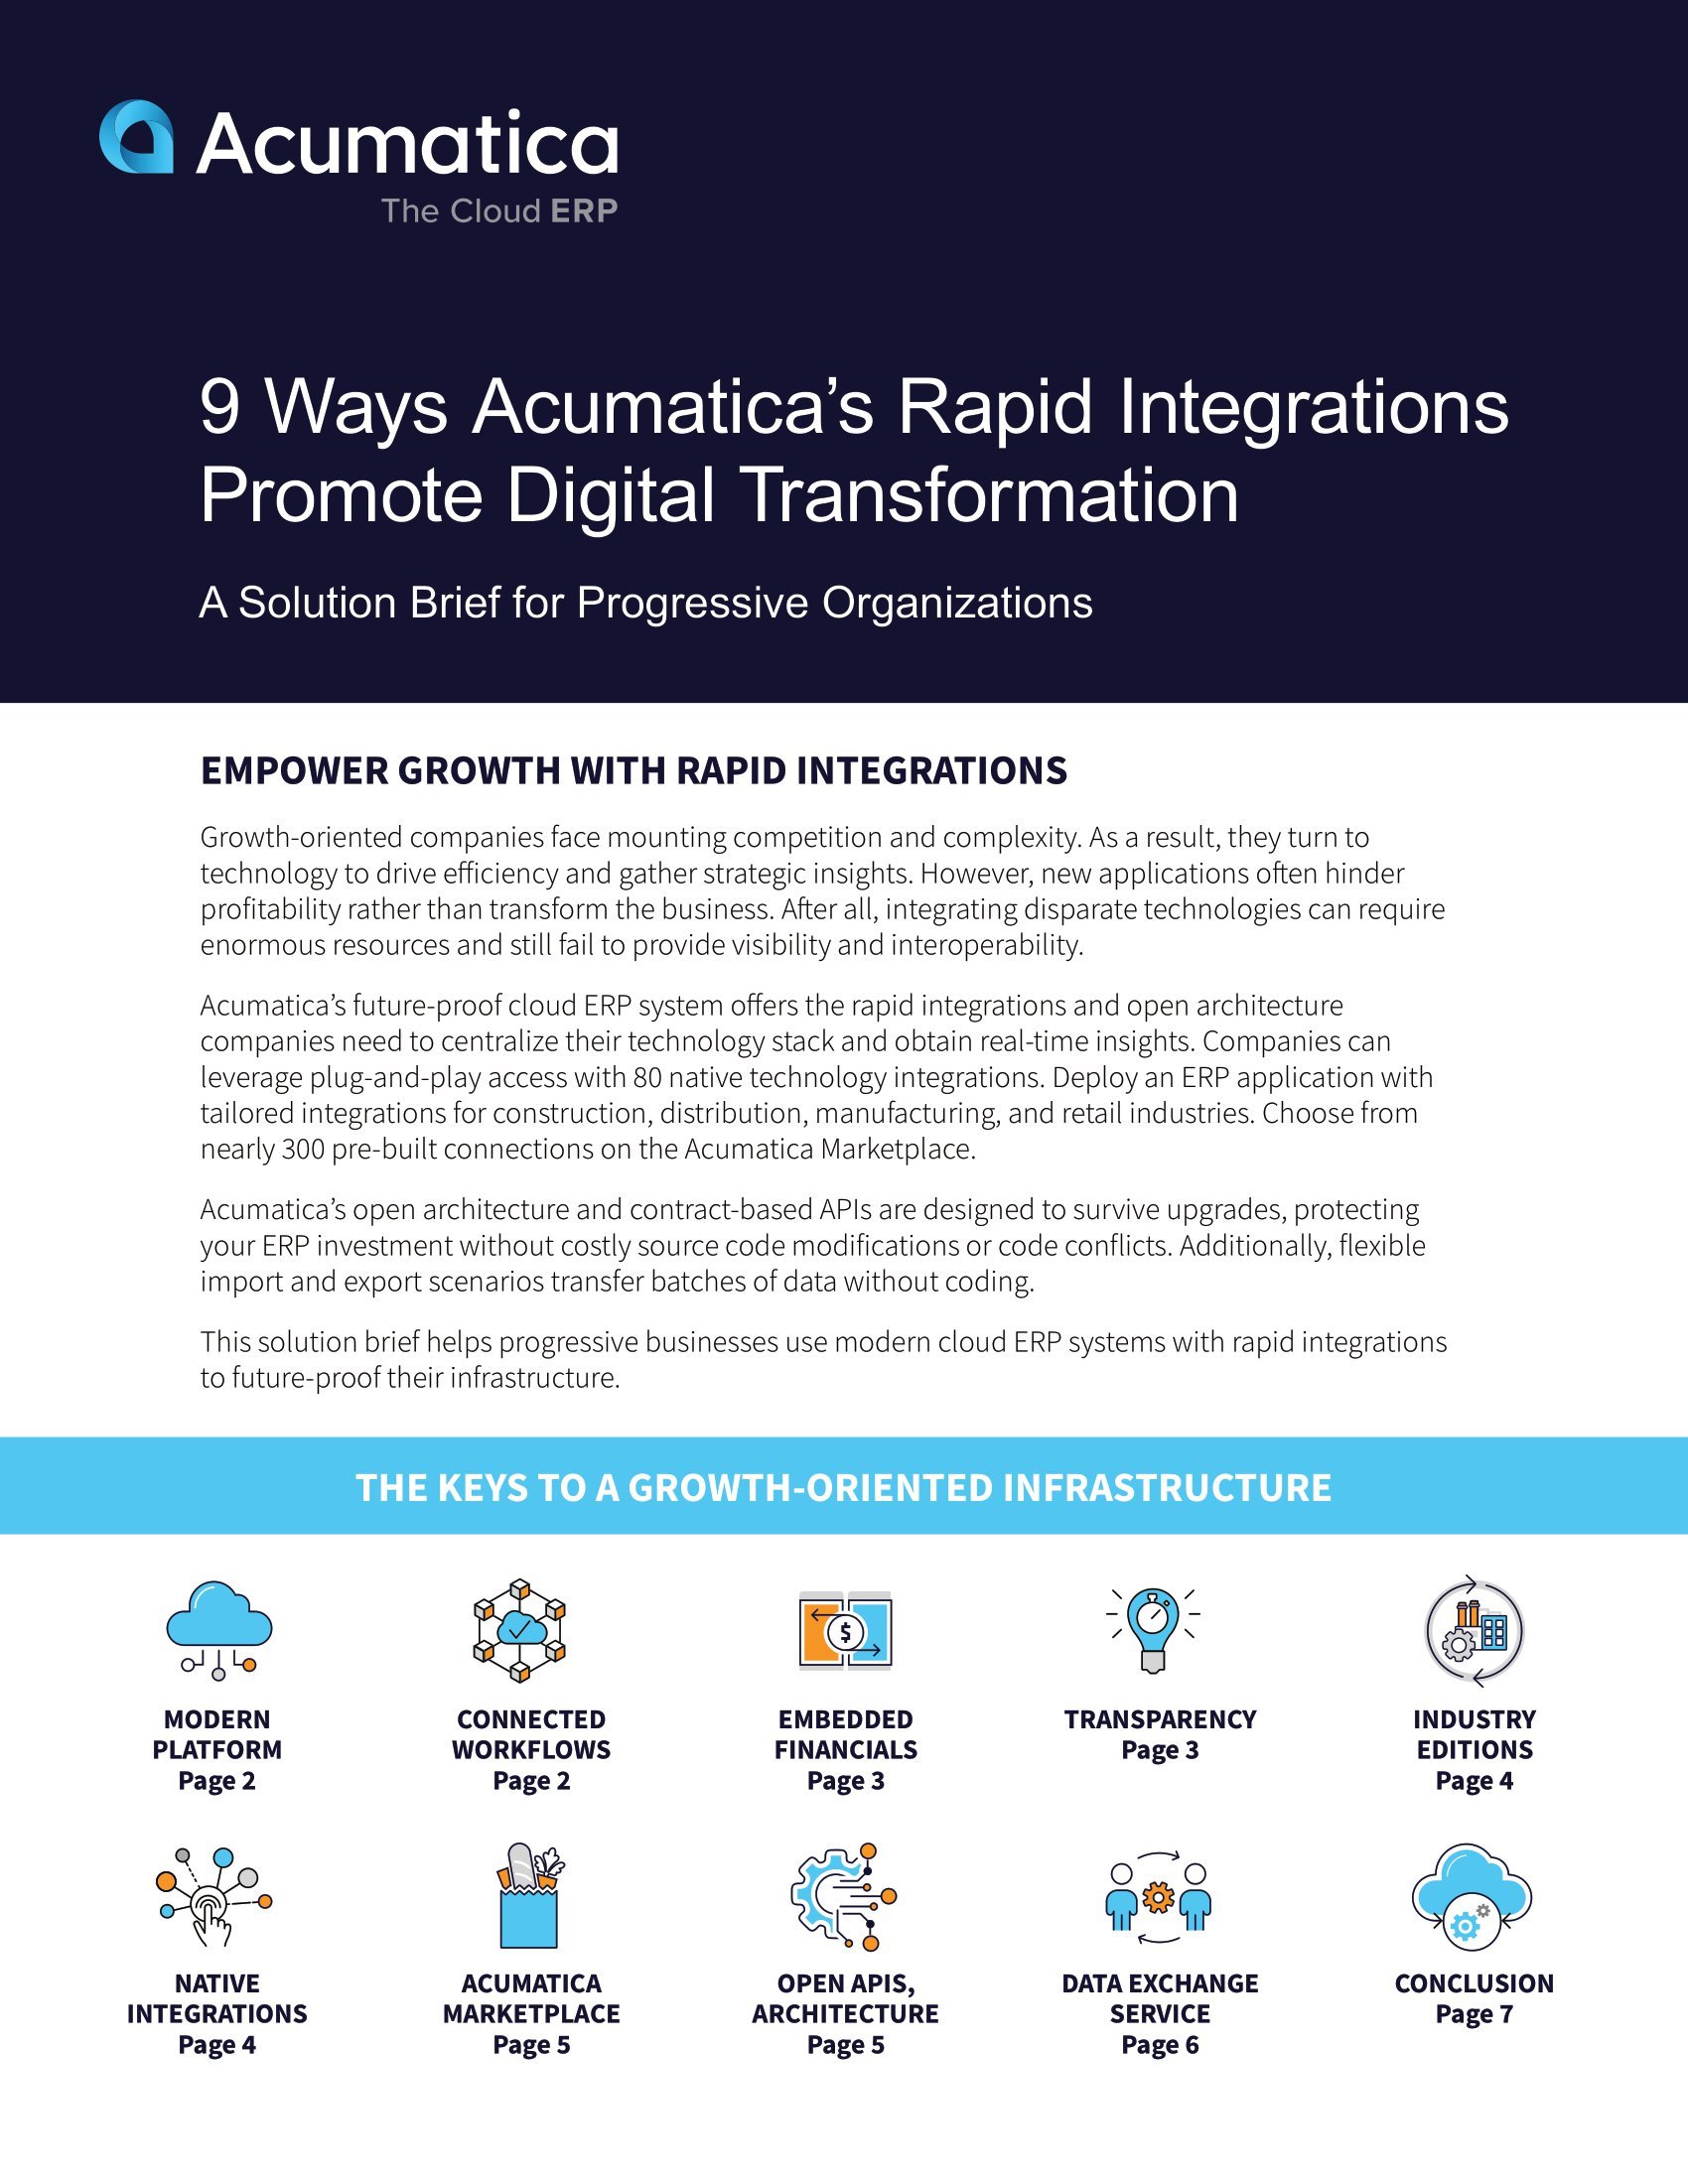 Support Digital Transformation with Acumatica’s Rapid Integrations